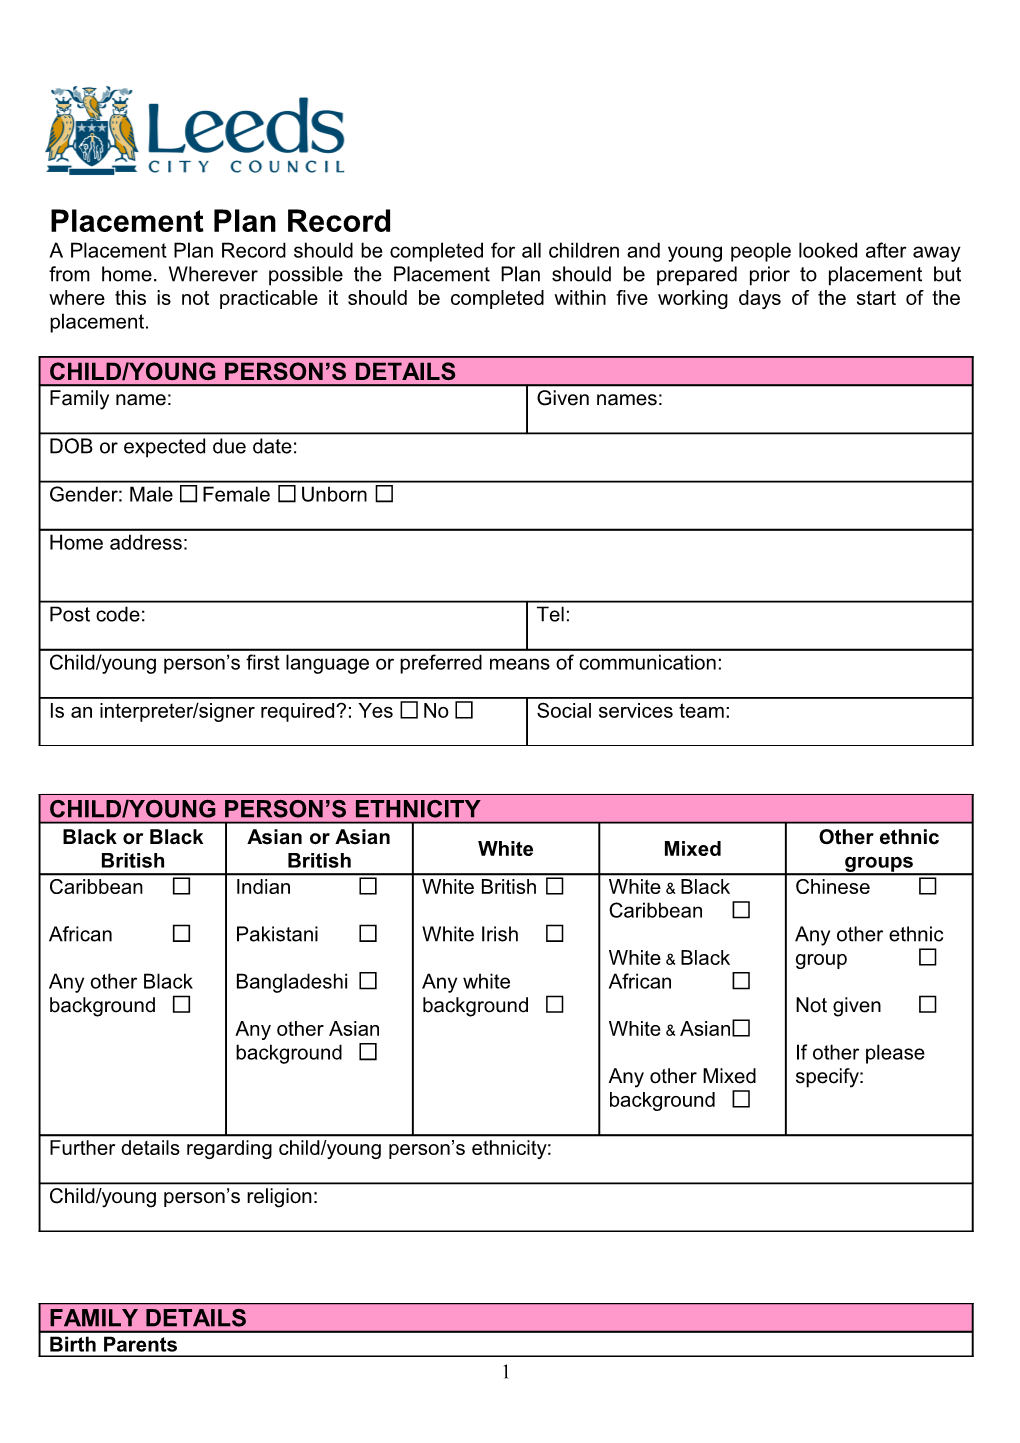 Placement Plan Record